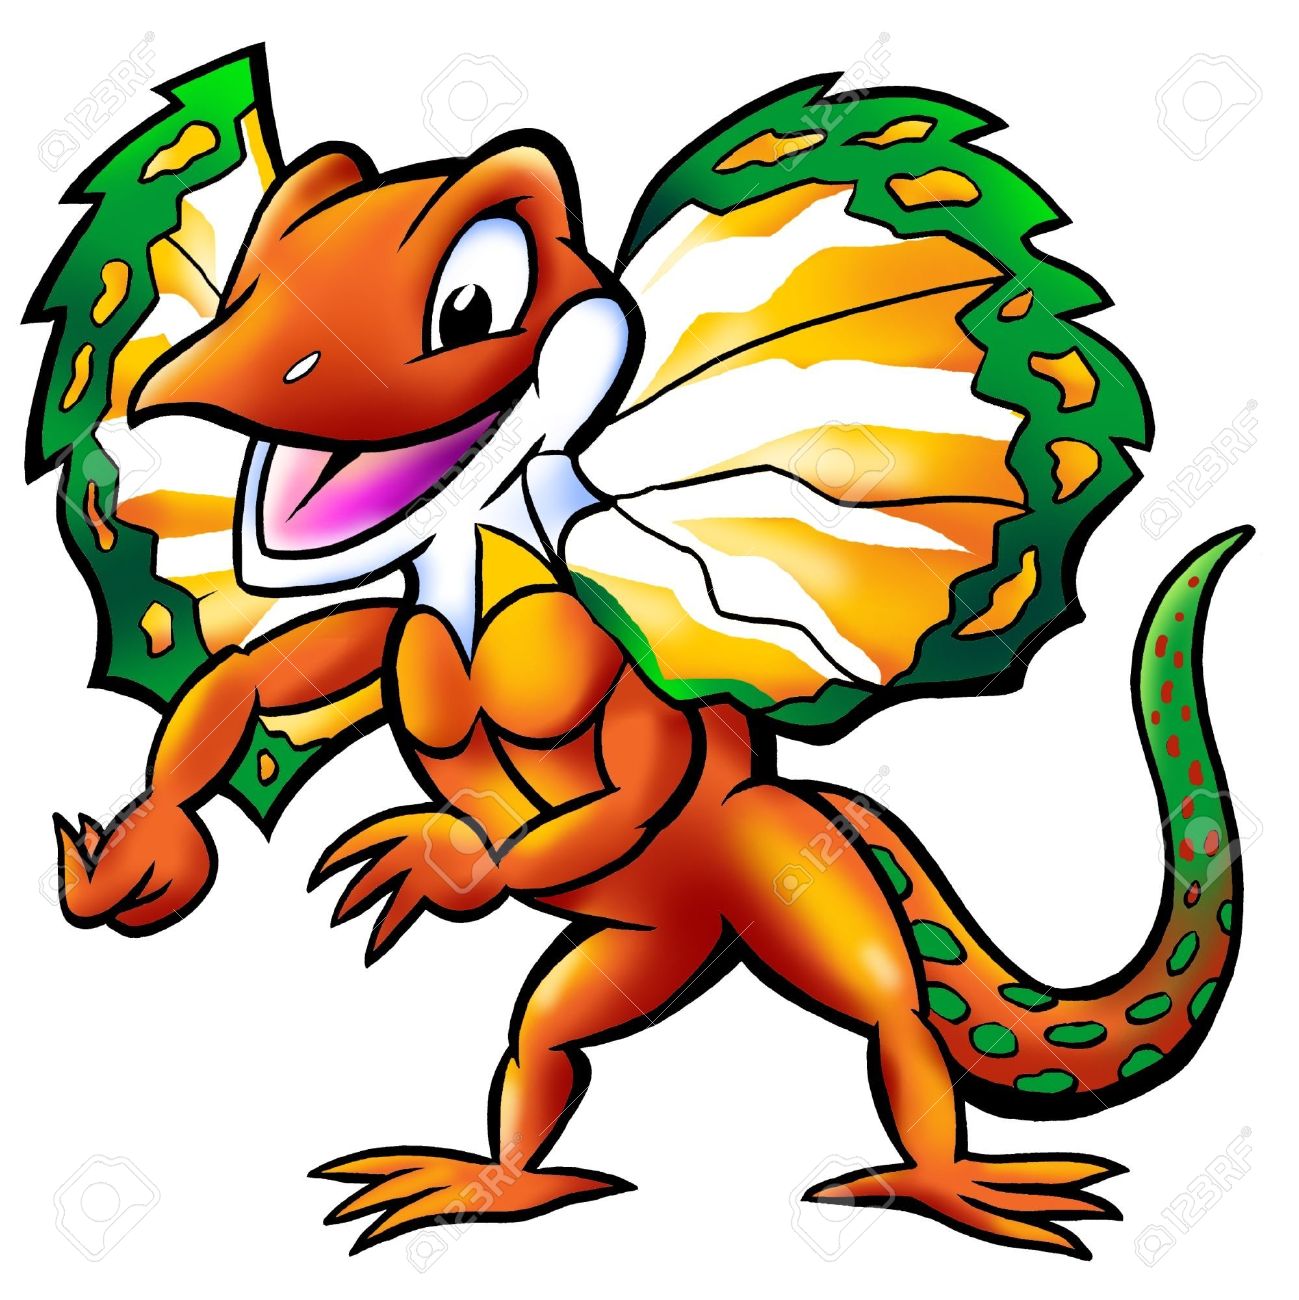 Happy Frilled Lizard Mascot Stock Photo, Picture And Royalty Free.